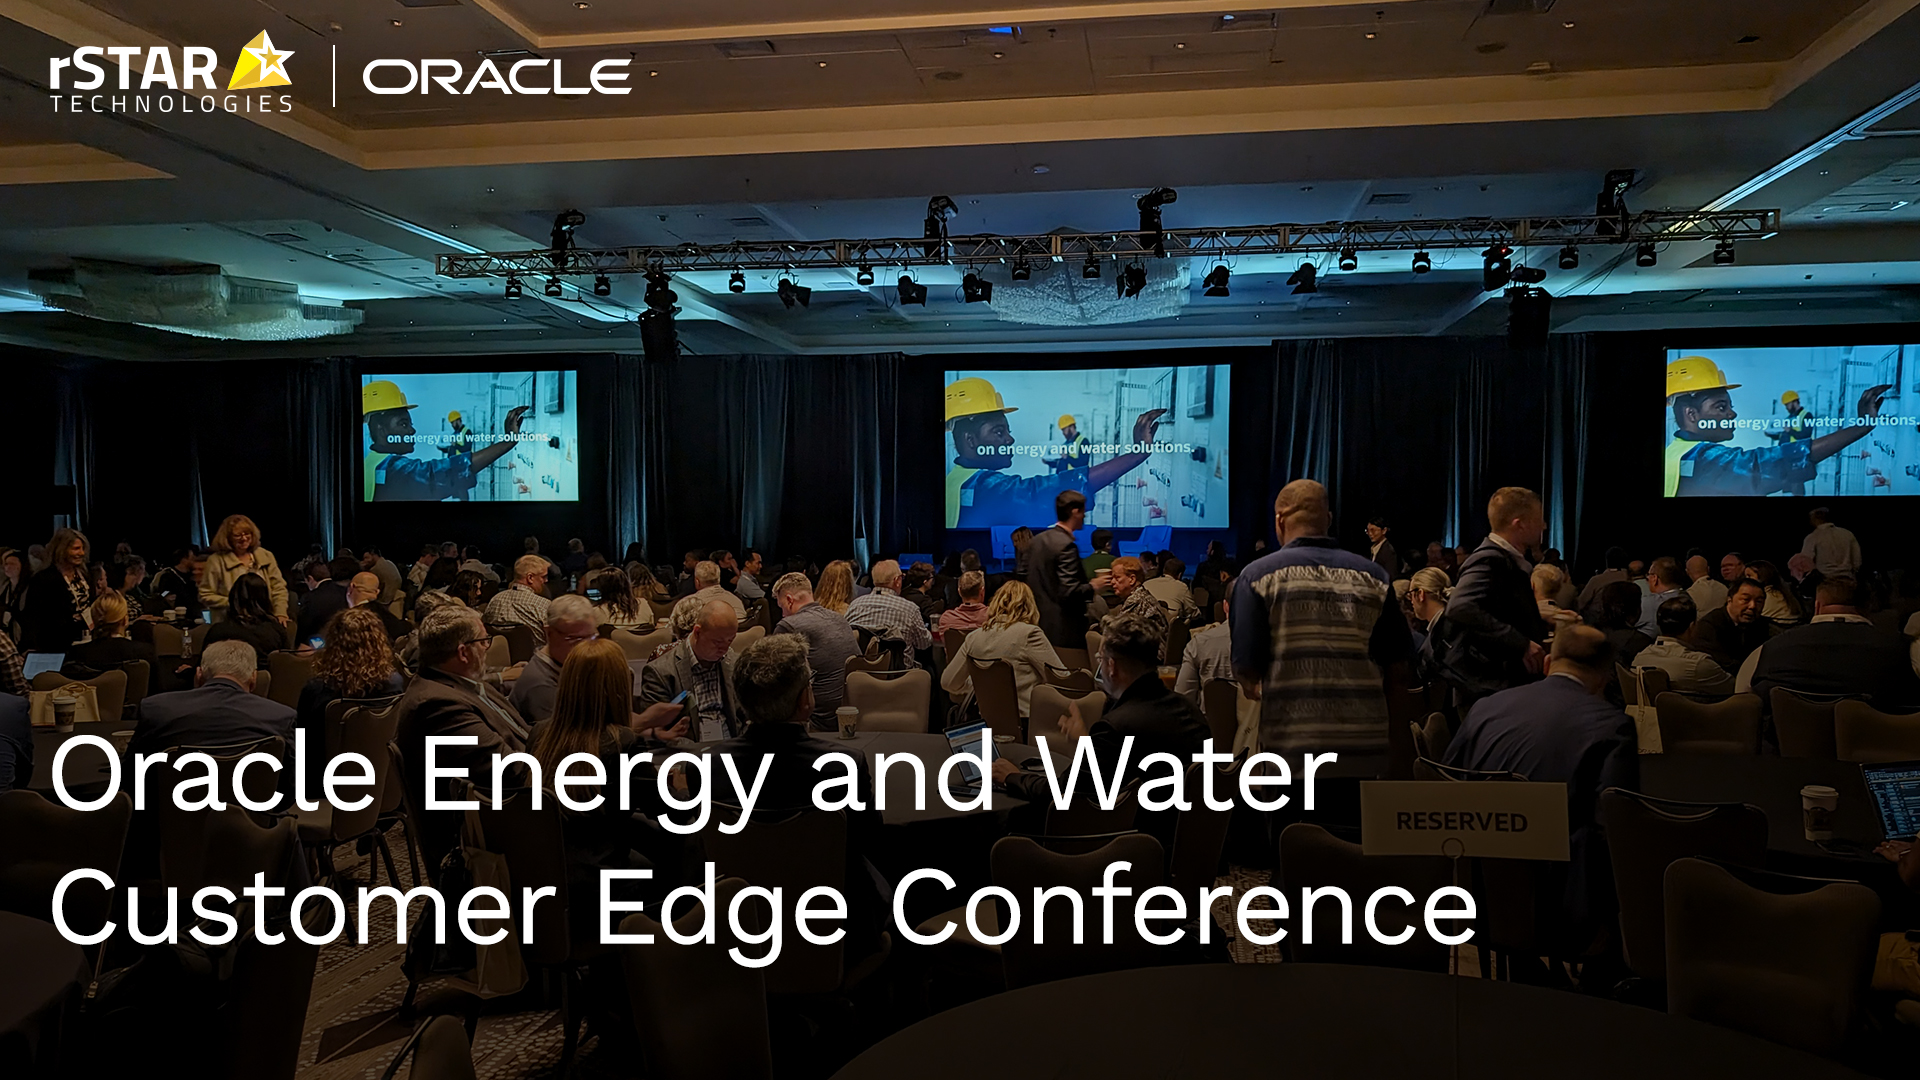 rSTAR Shares Industry Insights and GenAI Demonstration at Oracle Energy and Water Customer Edge  